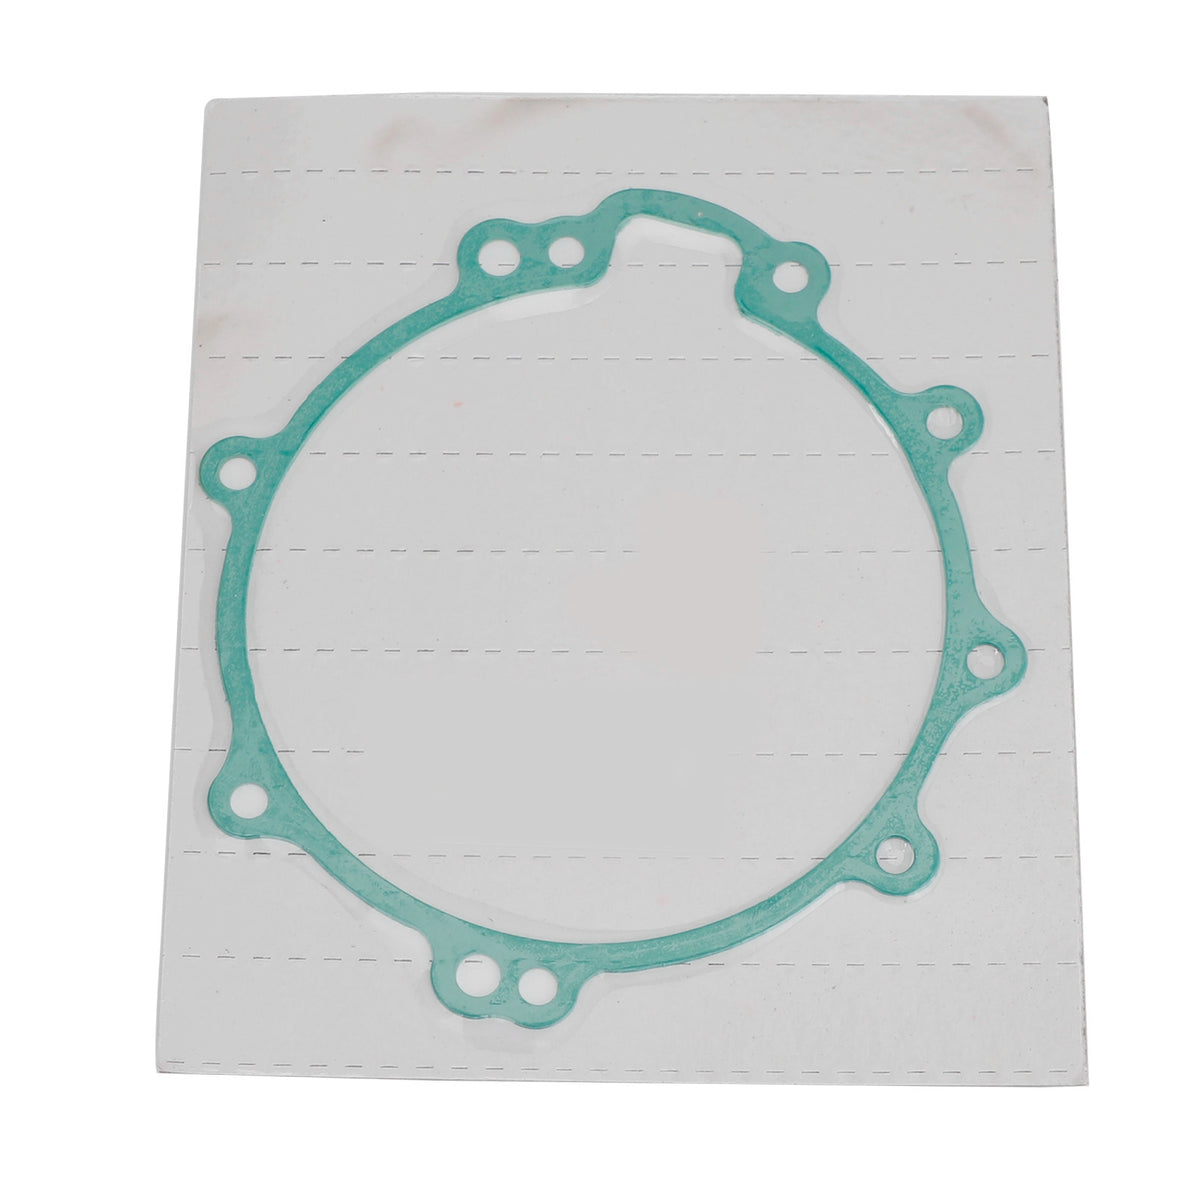 3pcs 2011-2022 Kawasaki ZX10R ZX-10R ZX-10RR Left side Engine Crankcase Cover Gasket 11061-0441